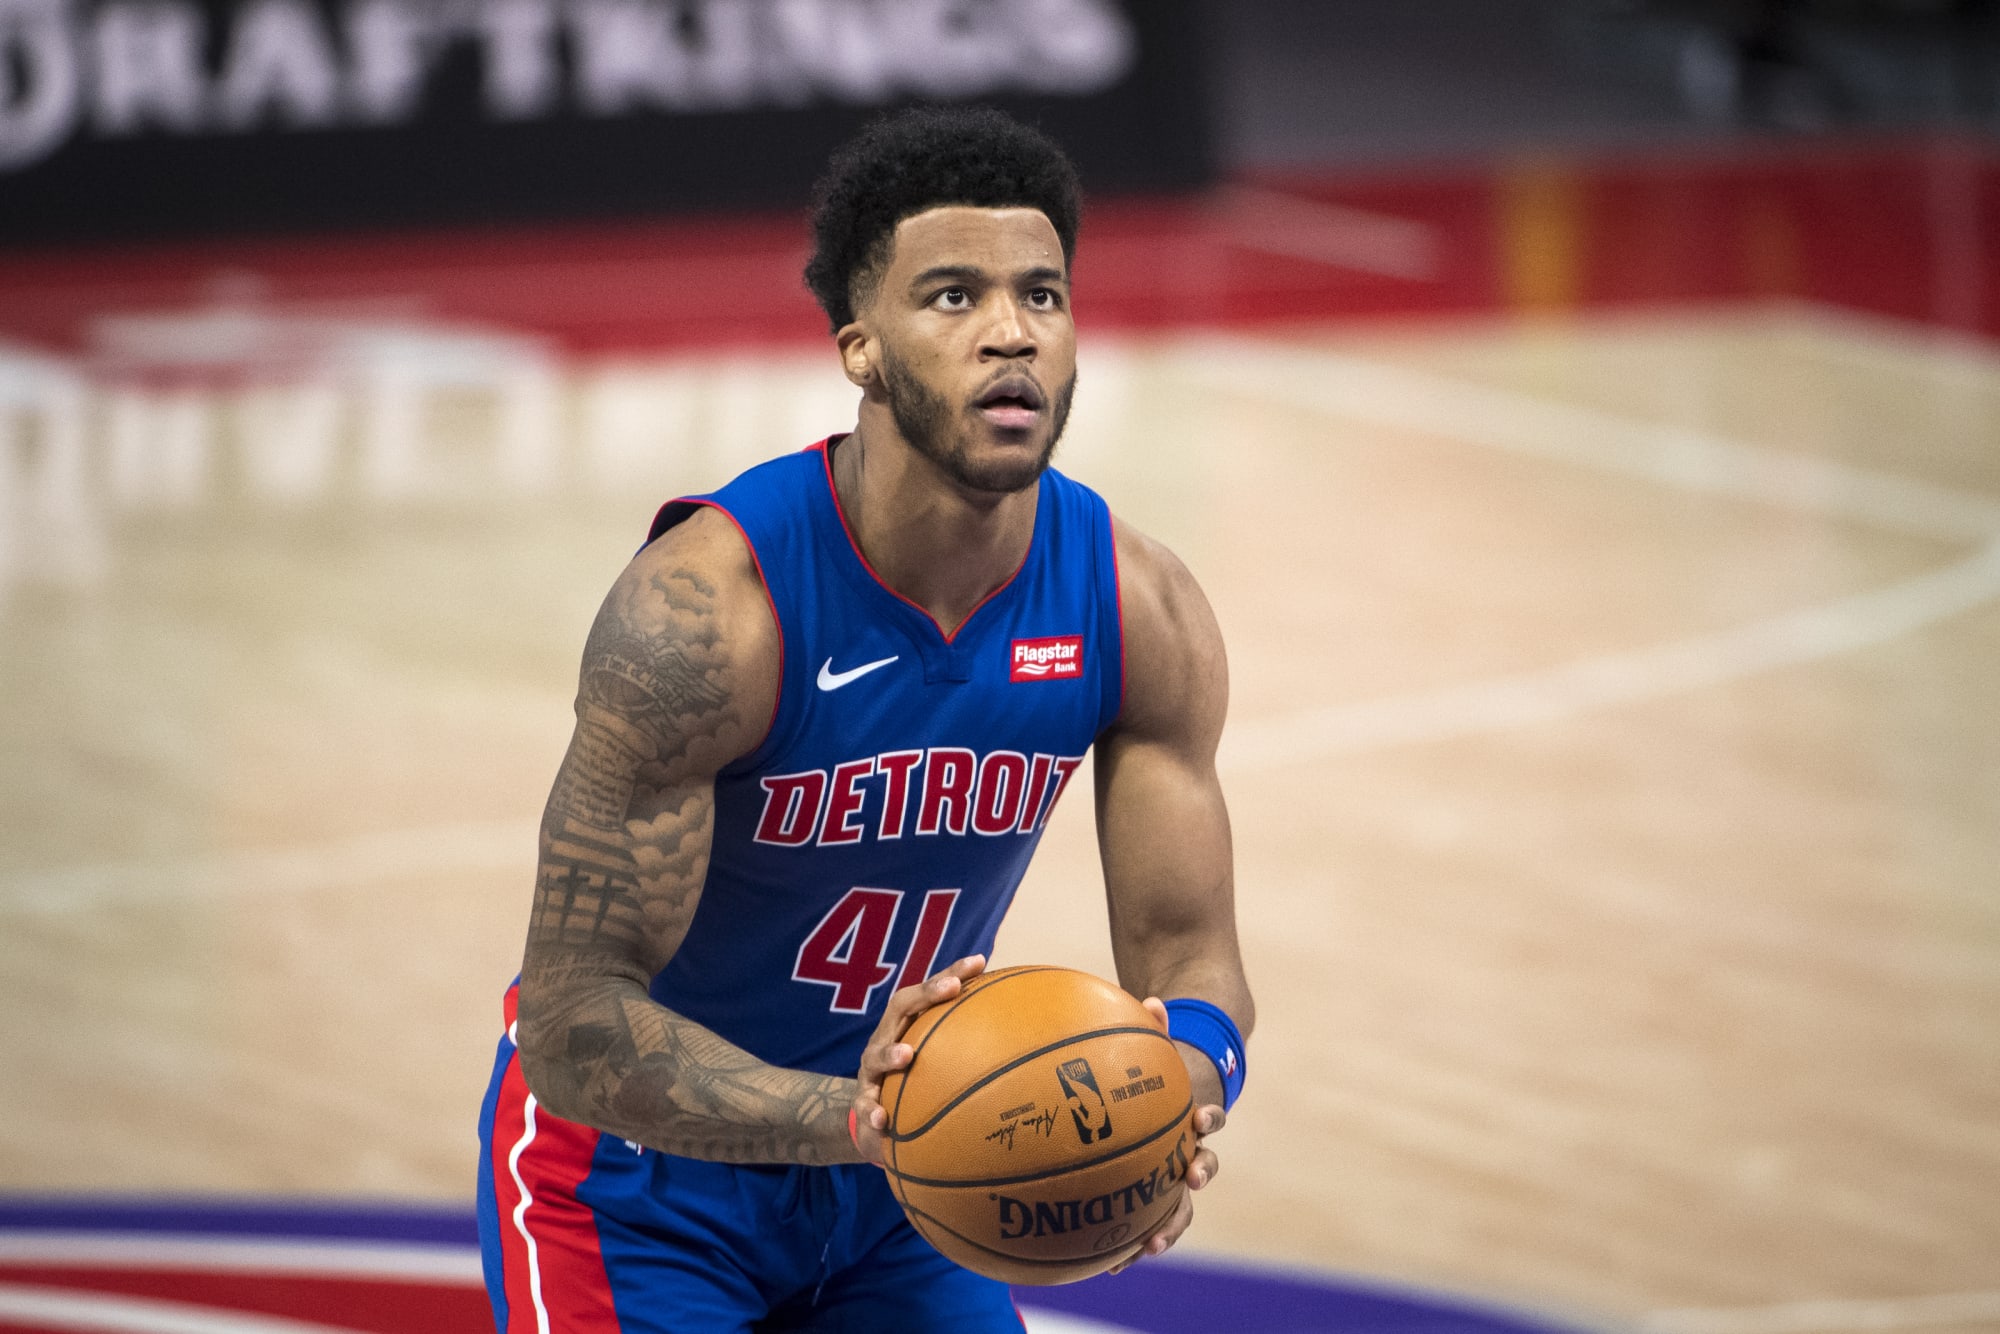 Detroit Pistons: Saddiq Bey is making history from behind 3-point line